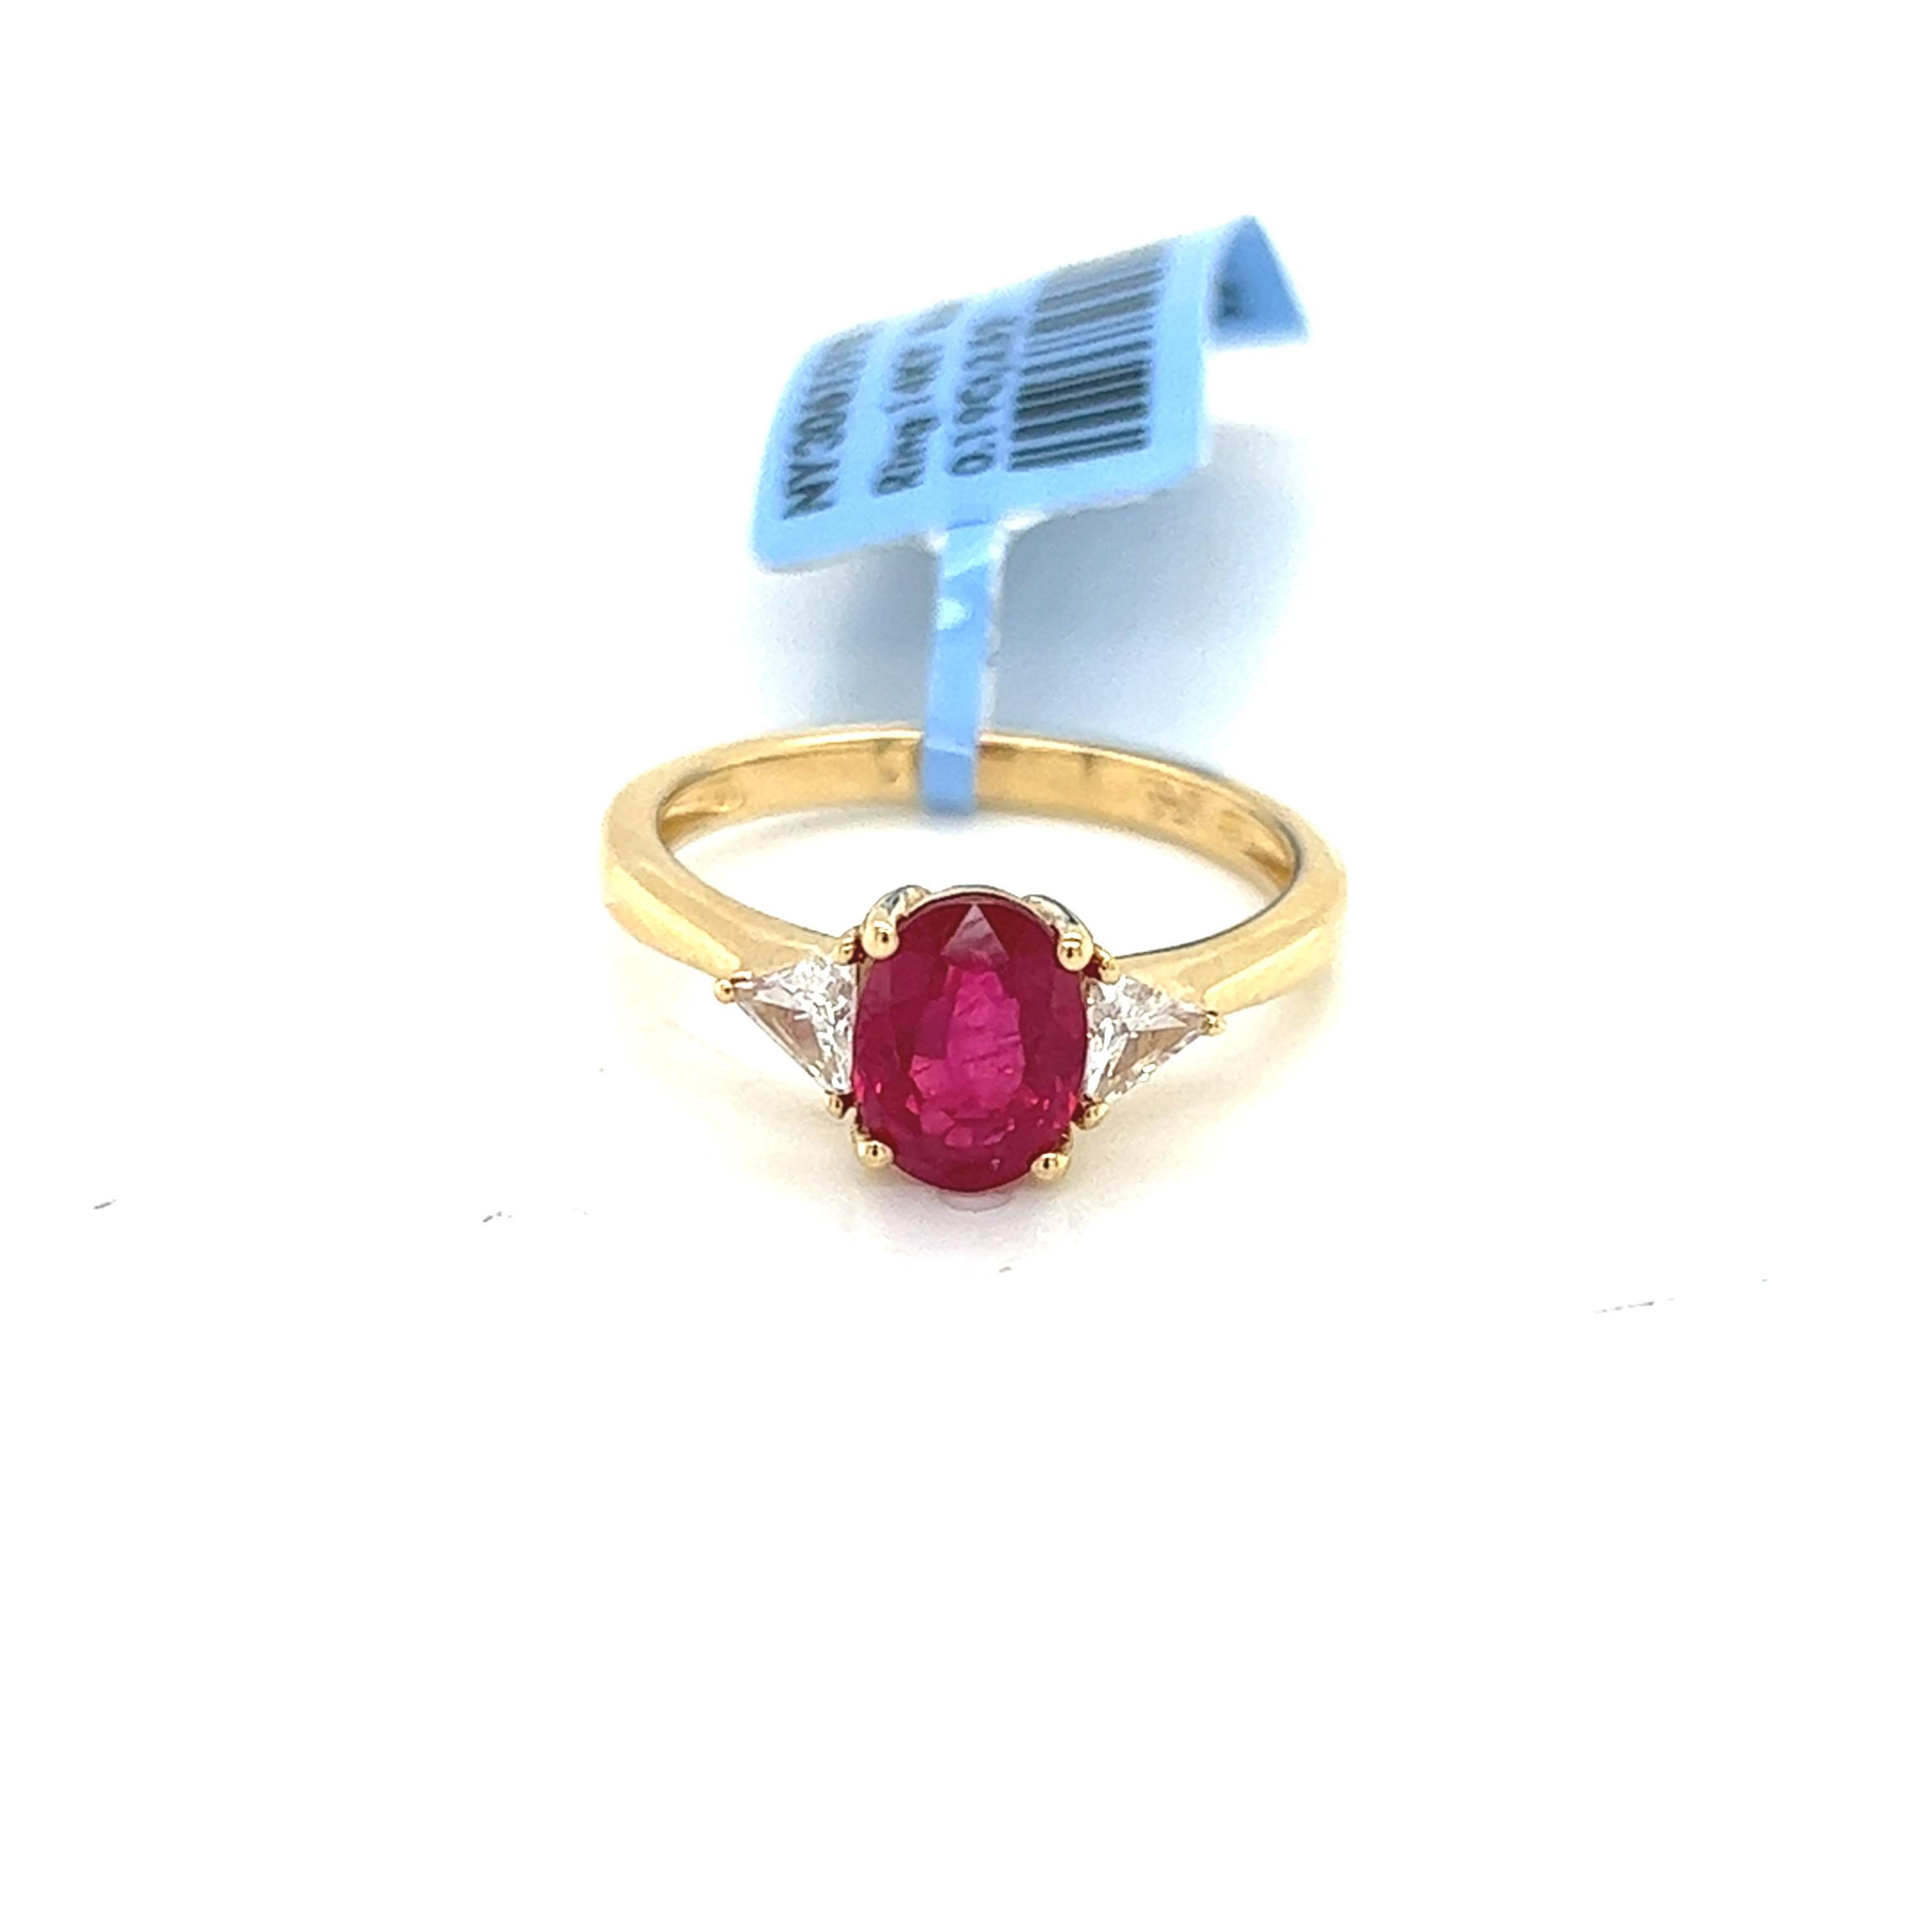 Introducing our stunning 2.04 Carat Ruby and Diamond Trillion Three Stone Ring, the perfect combination of elegance and sophistication. This exquisite ring features a 2.04 carat natural ruby, of exceptional quality and color, and two trilliant-cut